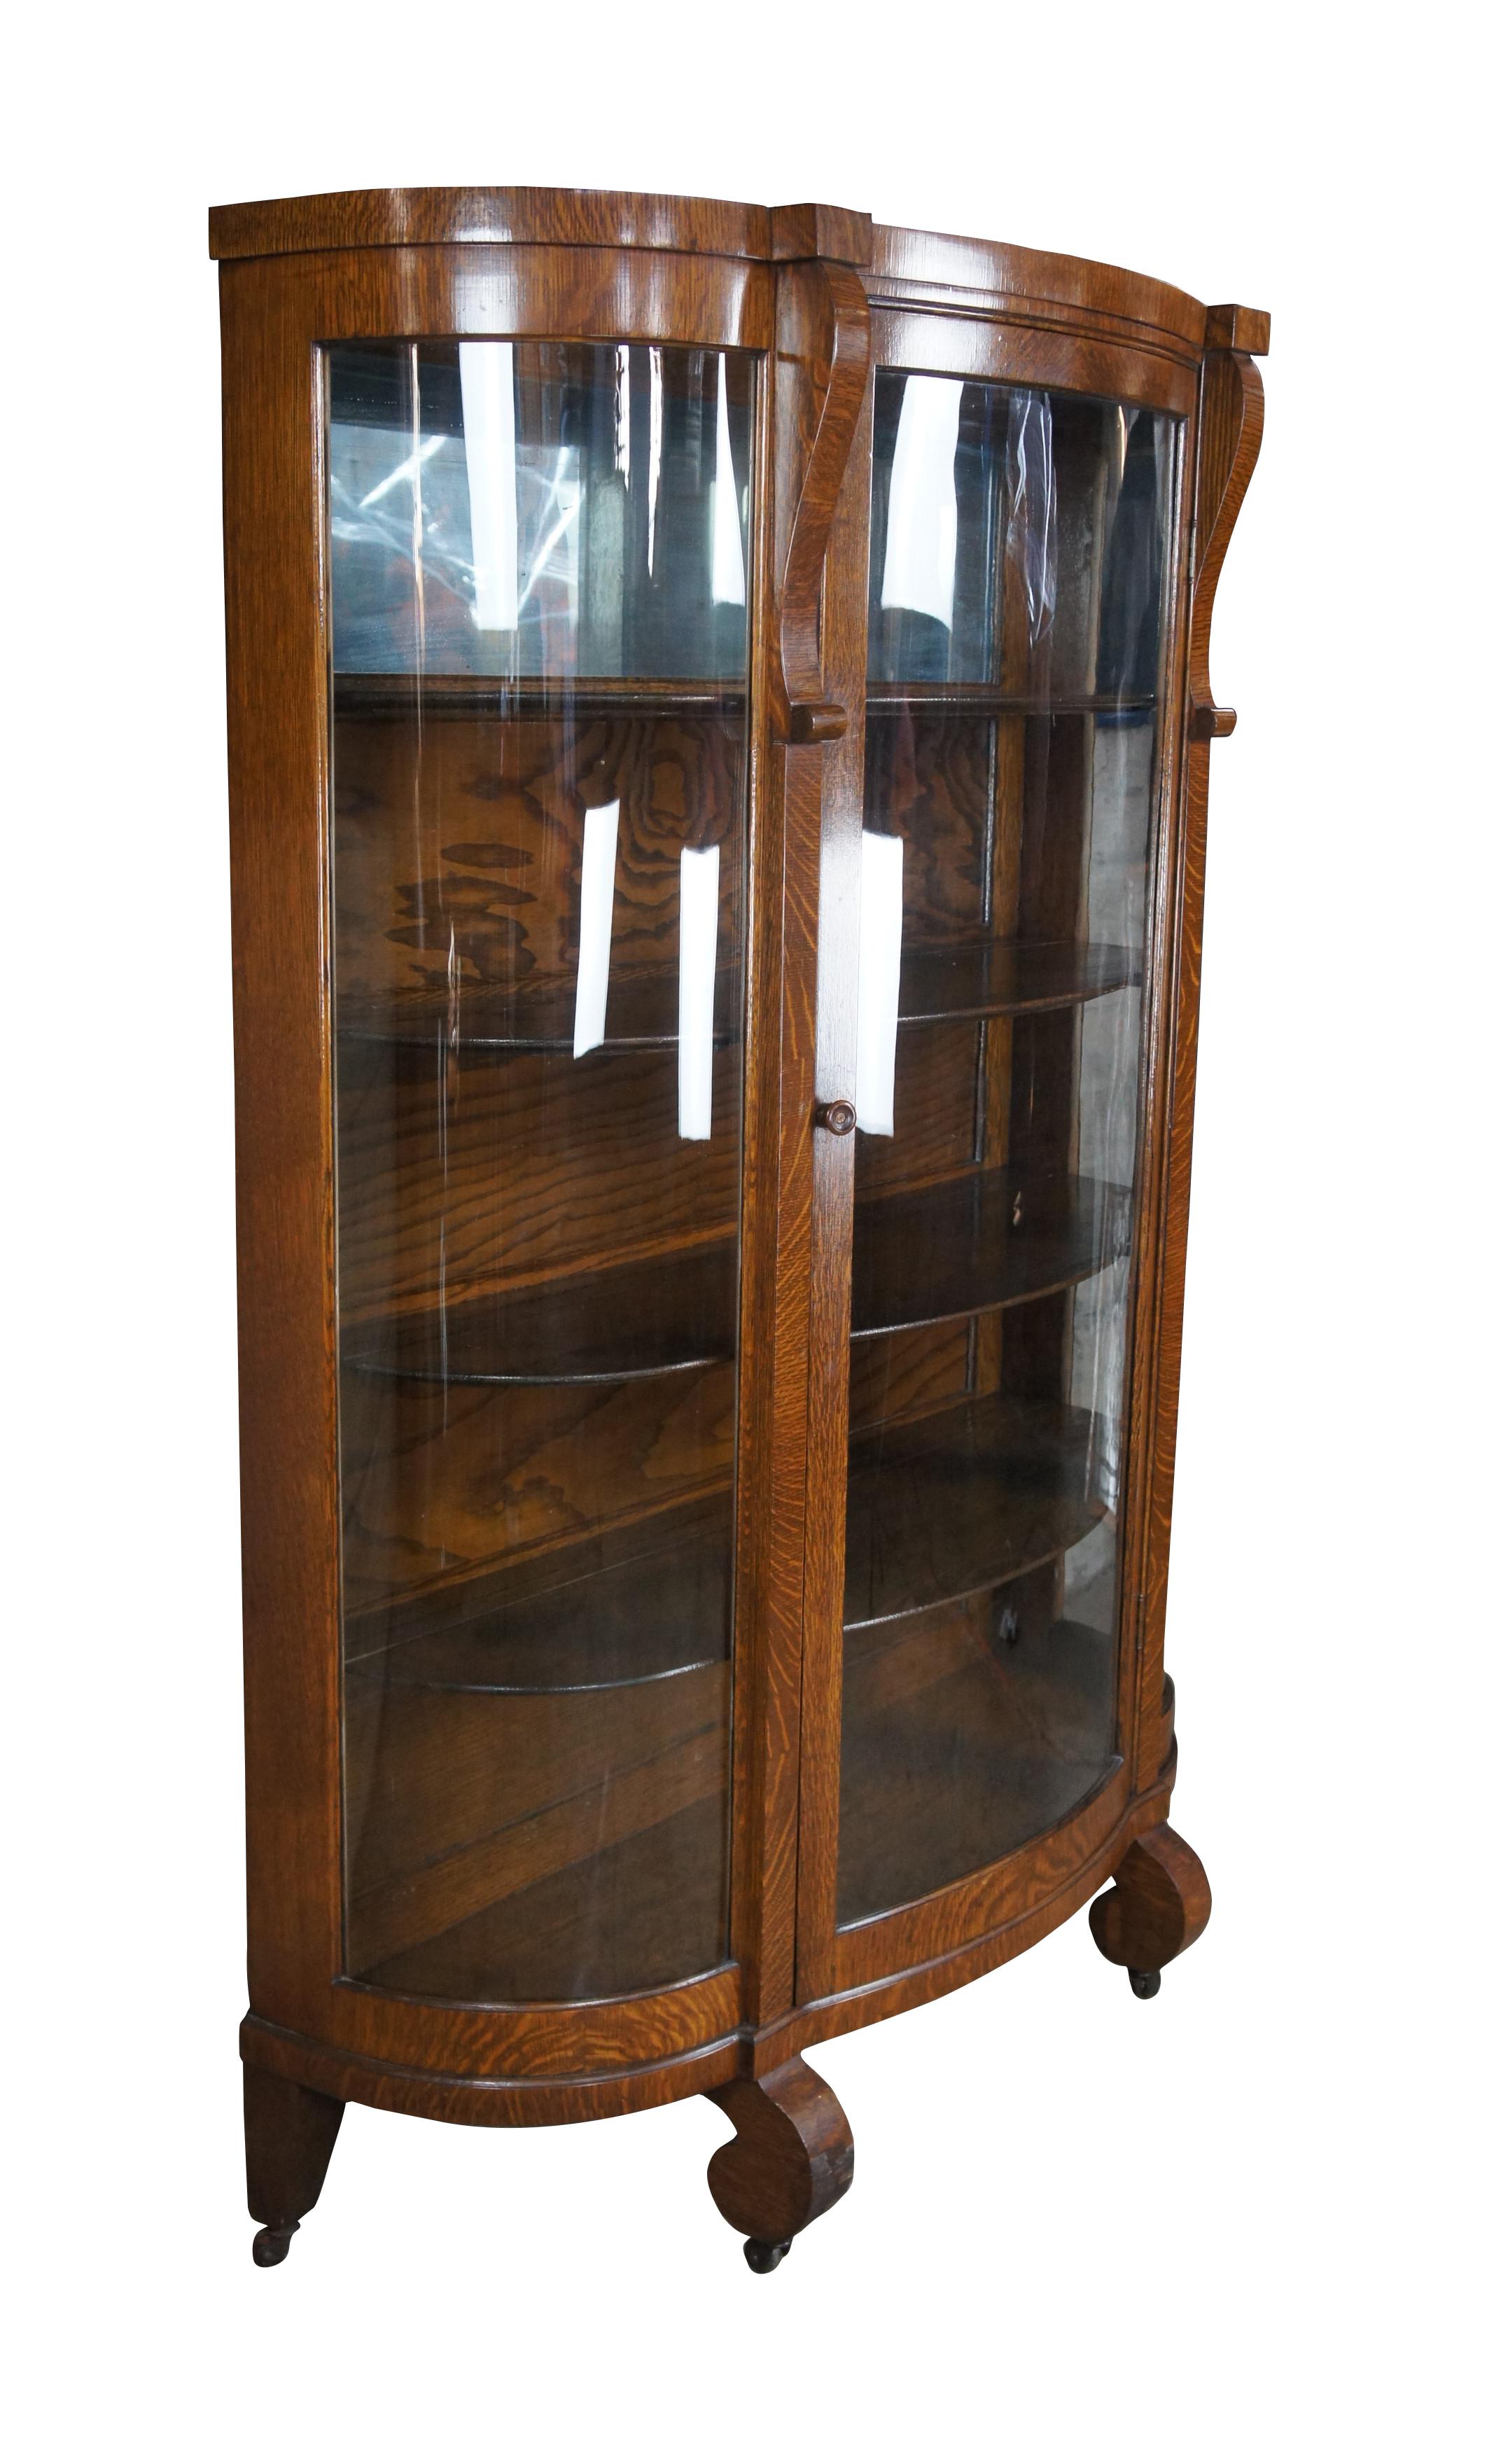 Victorian Antique American Empire Oak Curved Bowfront Glass Curio Display Cabinet Bookcase